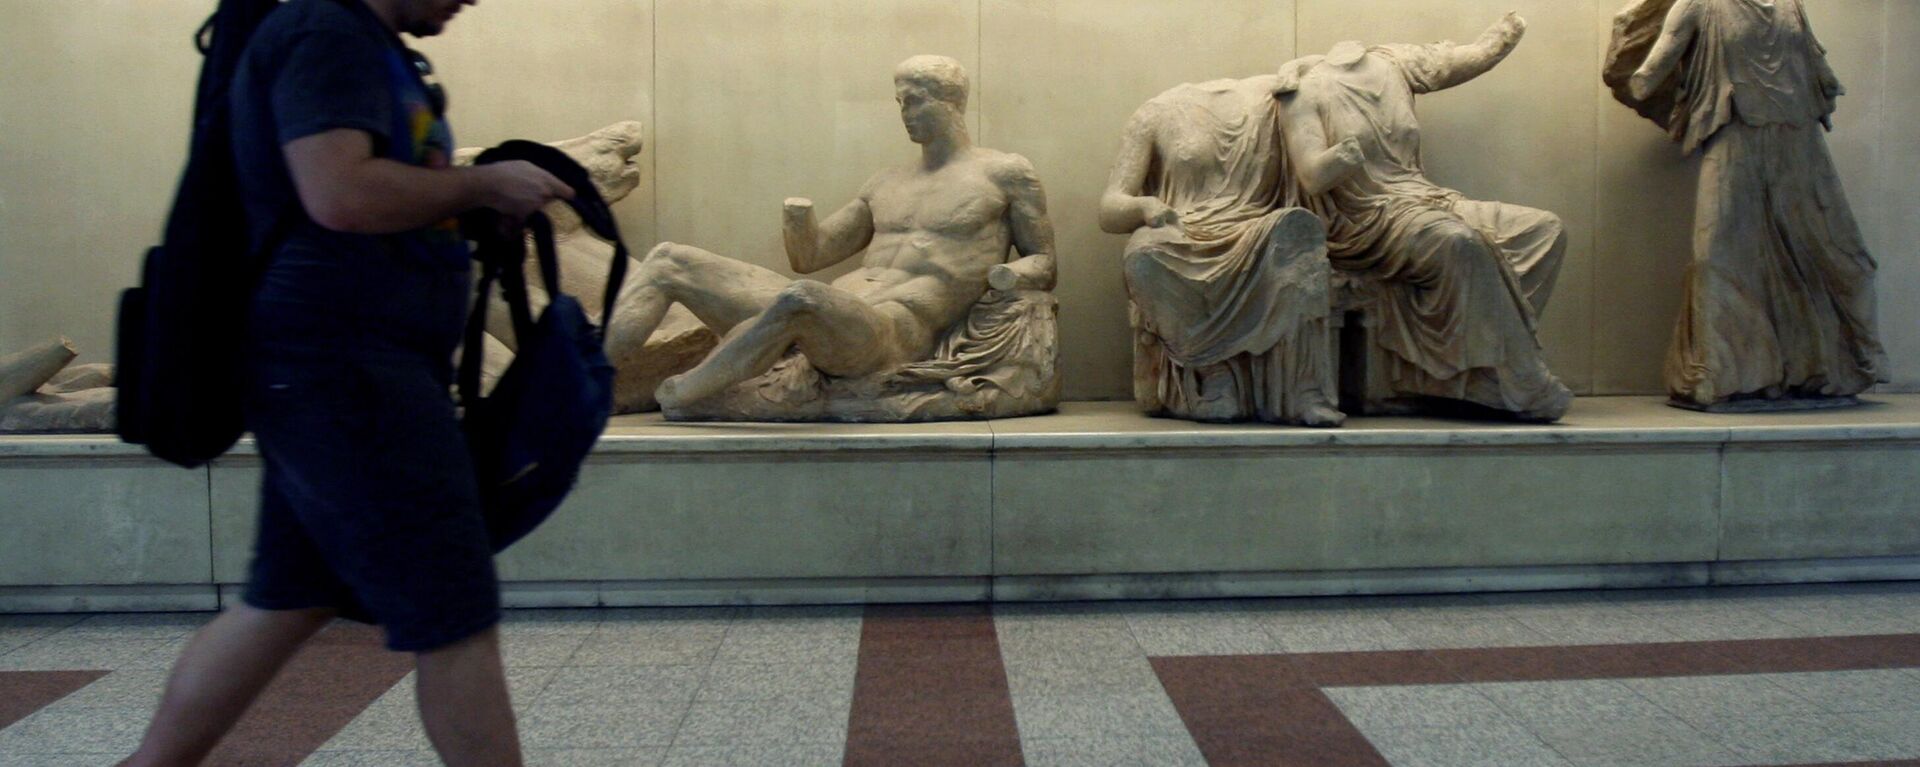 A passenger walks past copies of some of the Parthenon Sculptures displayed in the British Museum, at the Acropolis Metro station in Athens, on Thursday, June 11, 2009.  - Sputnik International, 1920, 27.08.2023